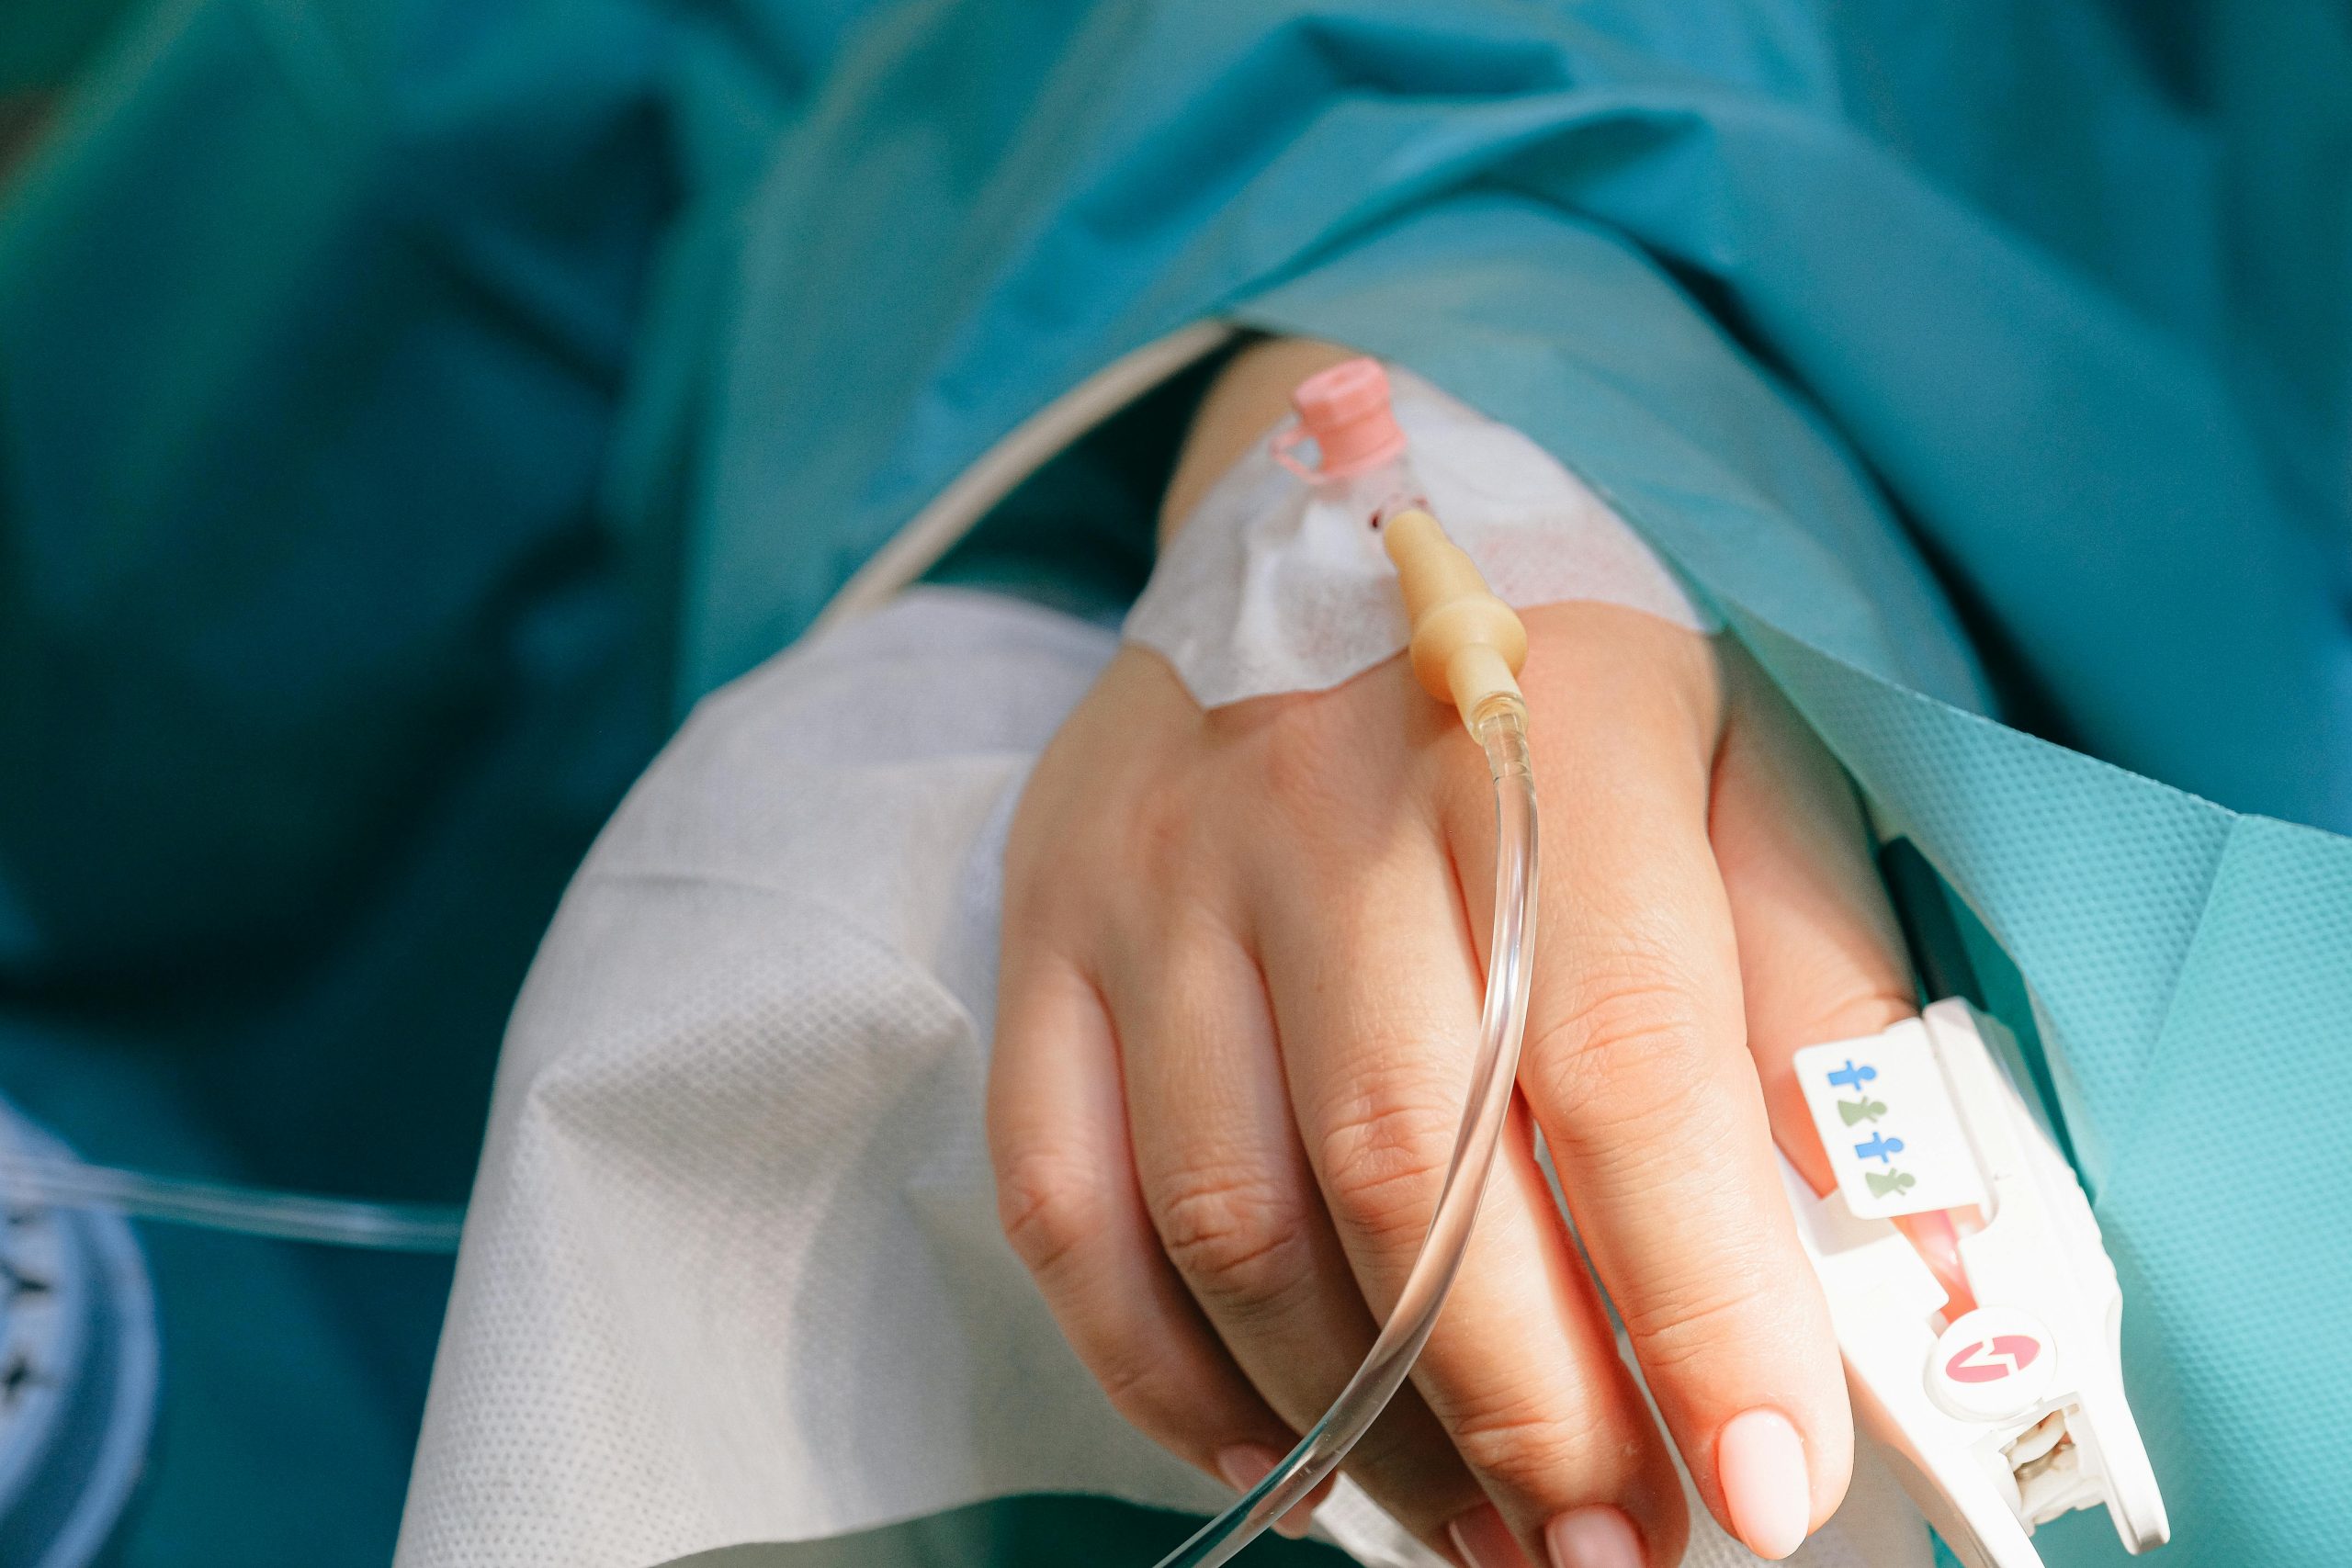 What’s the Difference Between a CCU and an ICU?